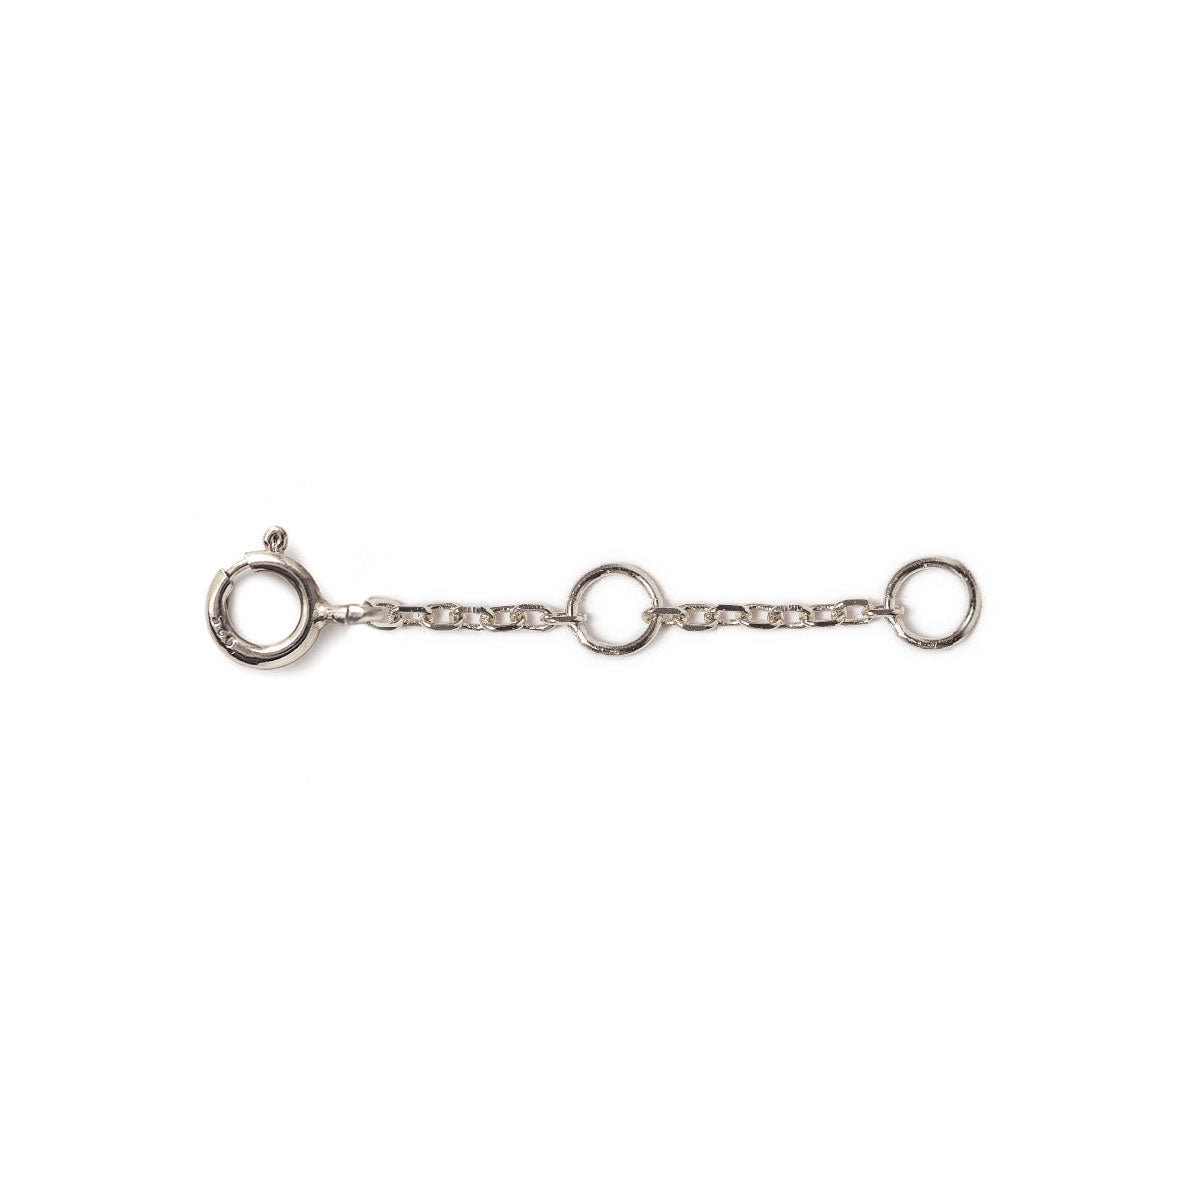 Bracelet Chain Extender, Jewelry Extension Sterling Silver – AMYO Jewelry